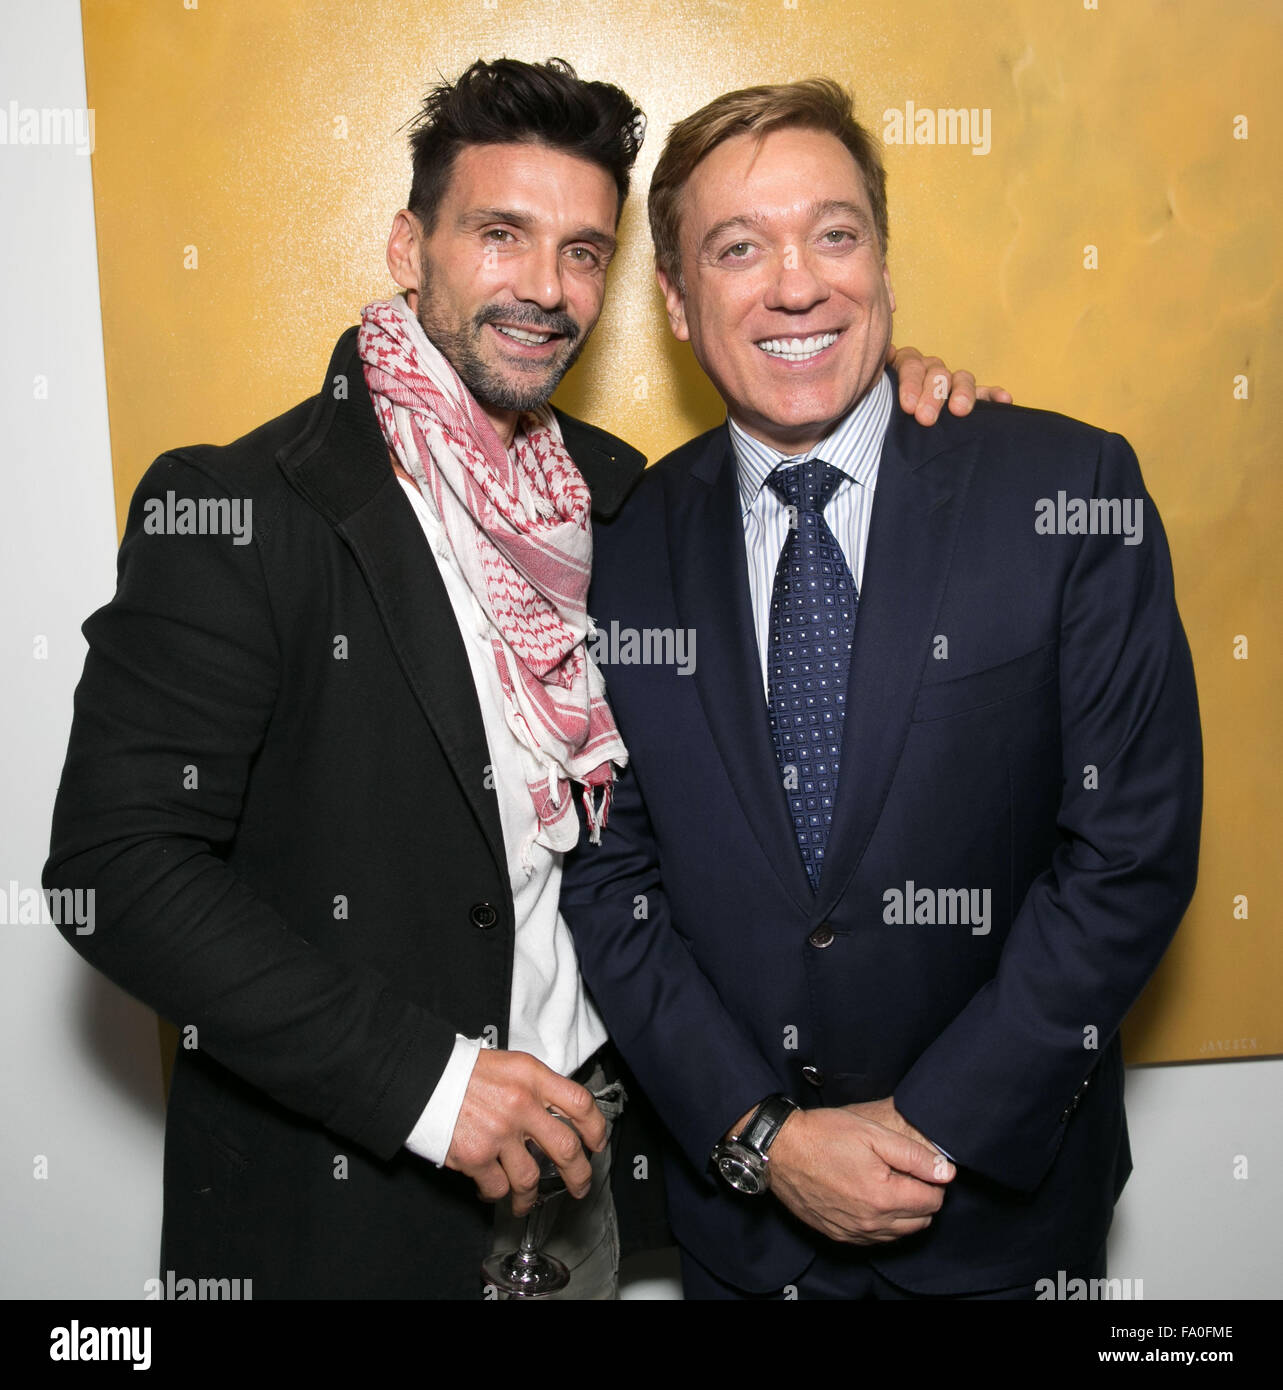 Celebrities attend Steve Janssen's Brain Change one night solo exhibition at De Re Gallery.  Featuring: Frank Grillo, Kevin Huvane Where: Los Angeles, California, United States When: 17 Nov 2015 Stock Photo